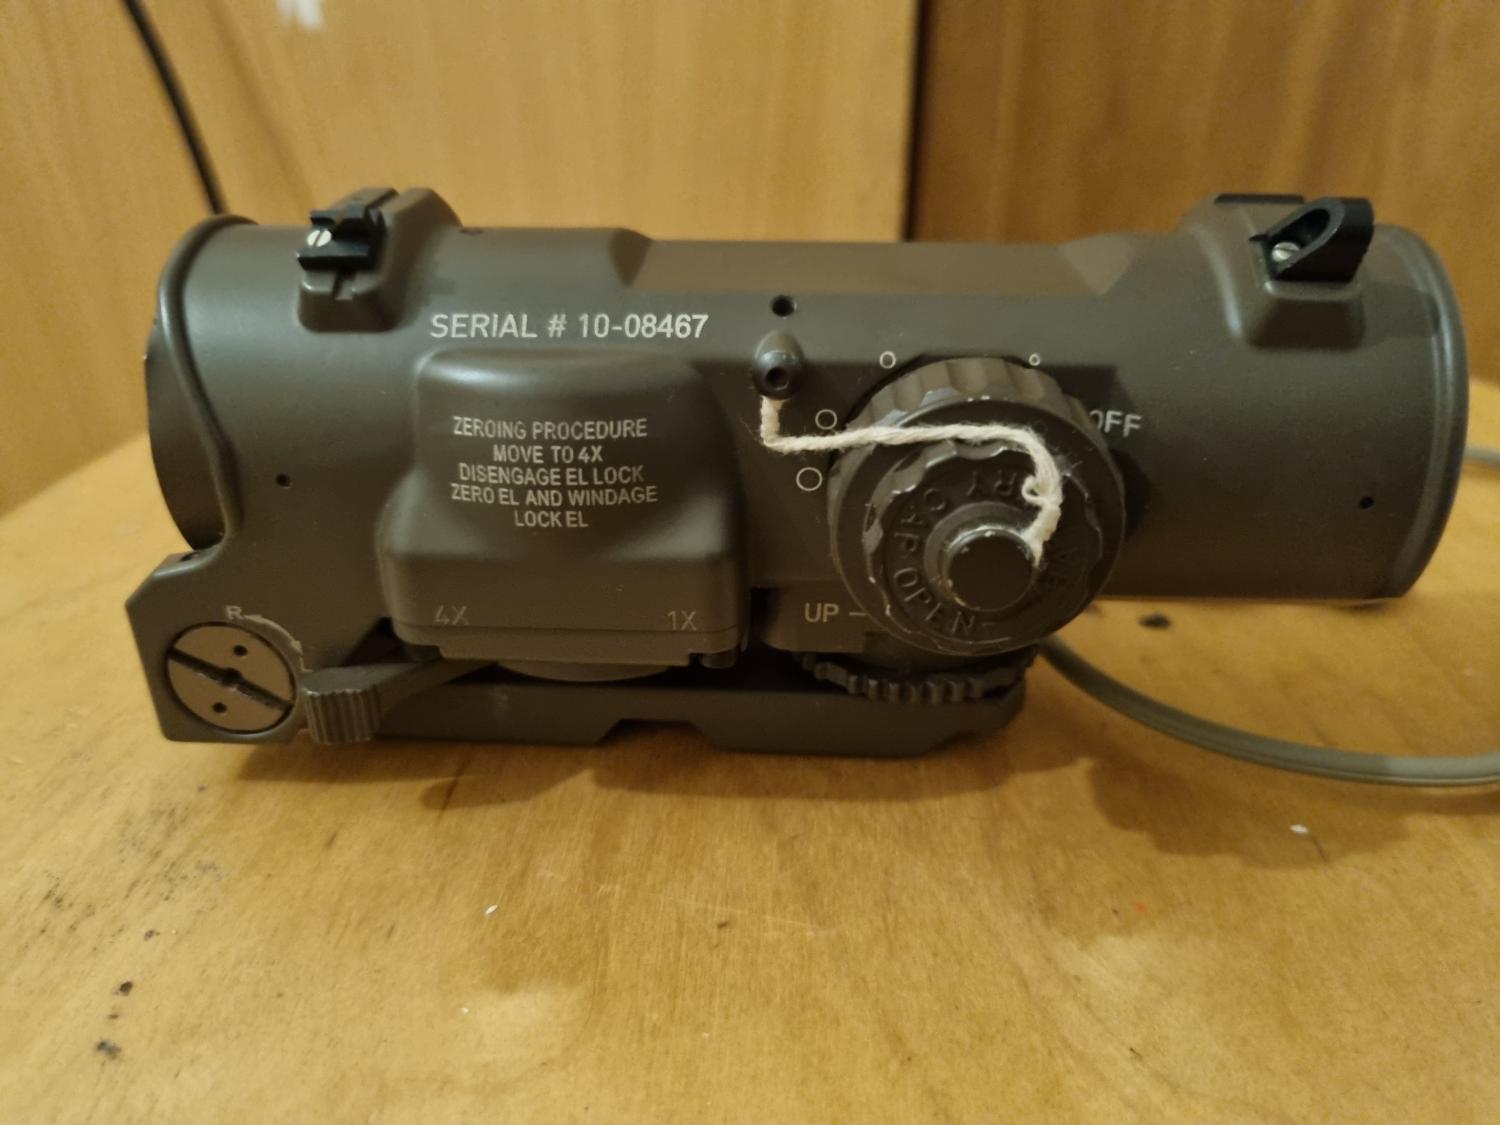 Evolution gear Elcan Specter 1x to 4x - Parts - Airsoft Forums UK